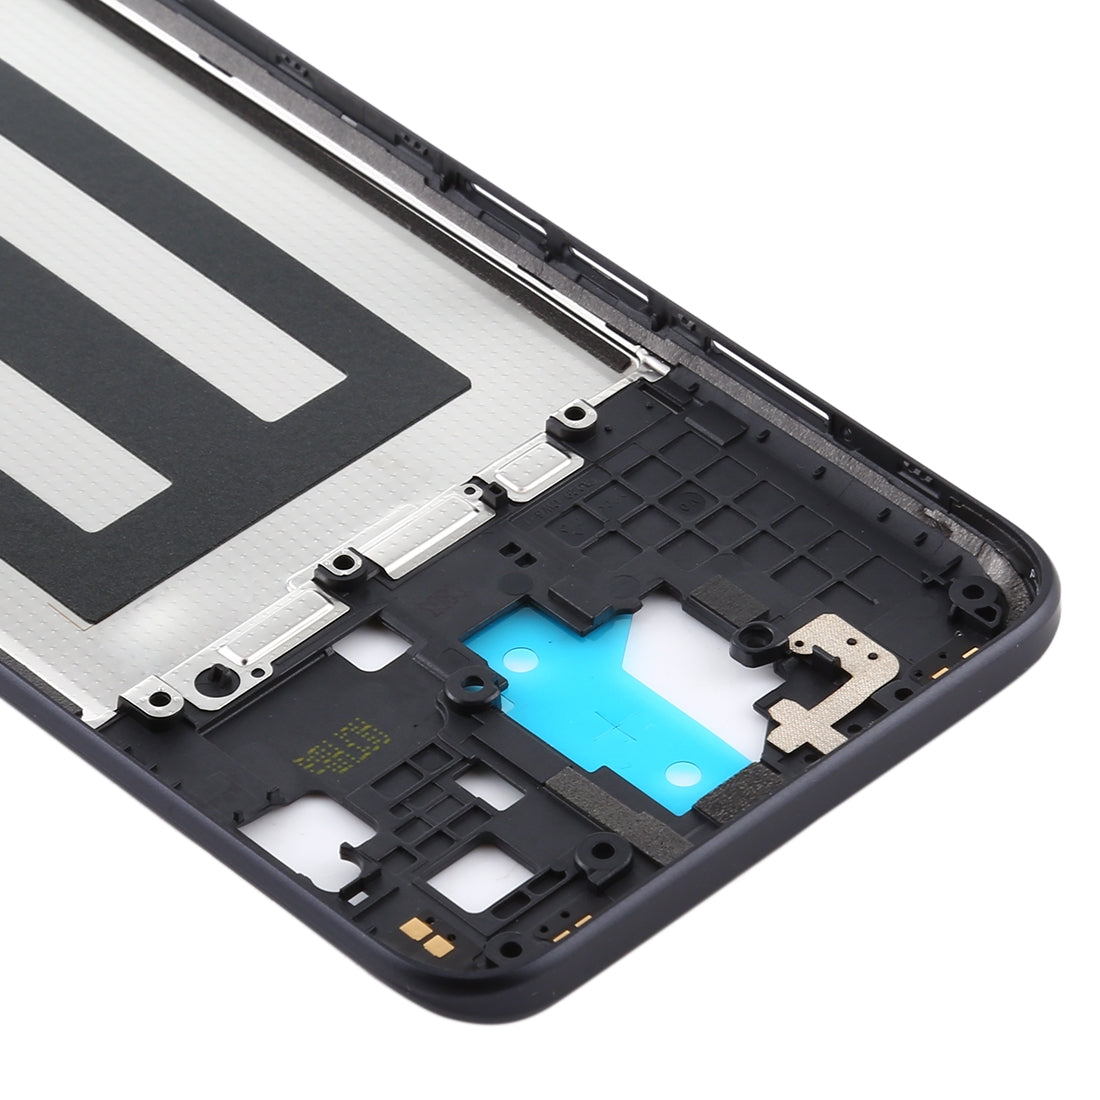 Chassis Middle Frame LCD Oppo A11X / A9 2020 Black